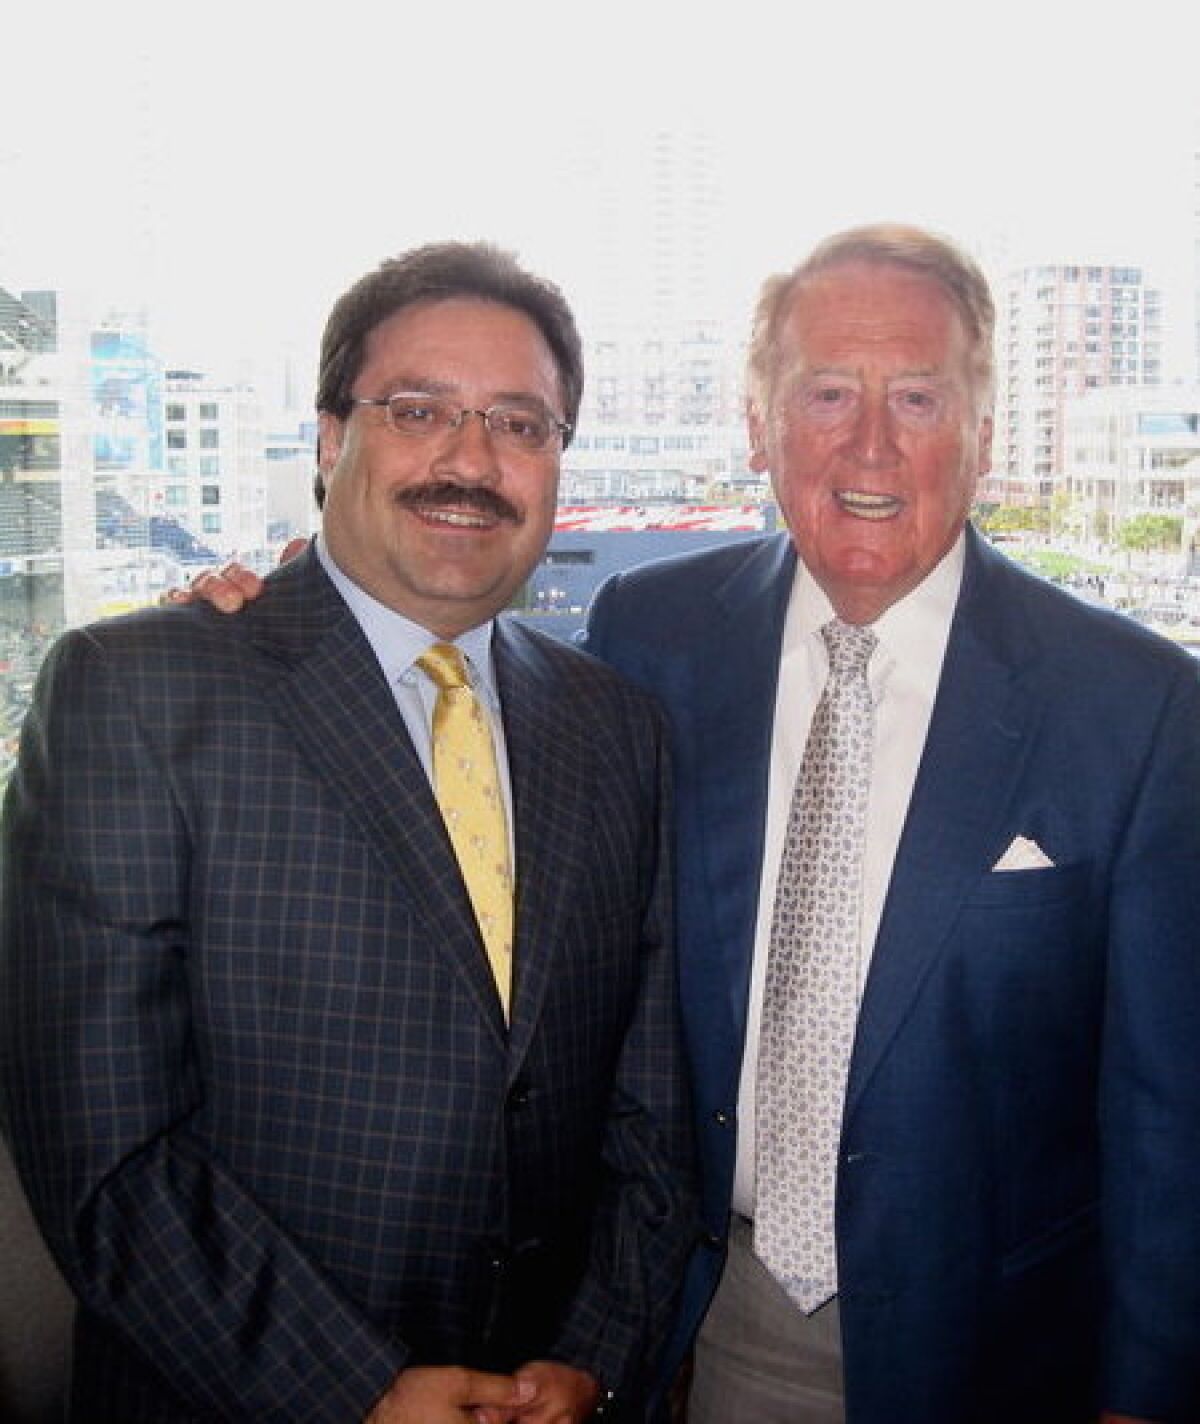 Michael Horowicz poses with Vin Scully in the broadcaster's booth in San Diego.